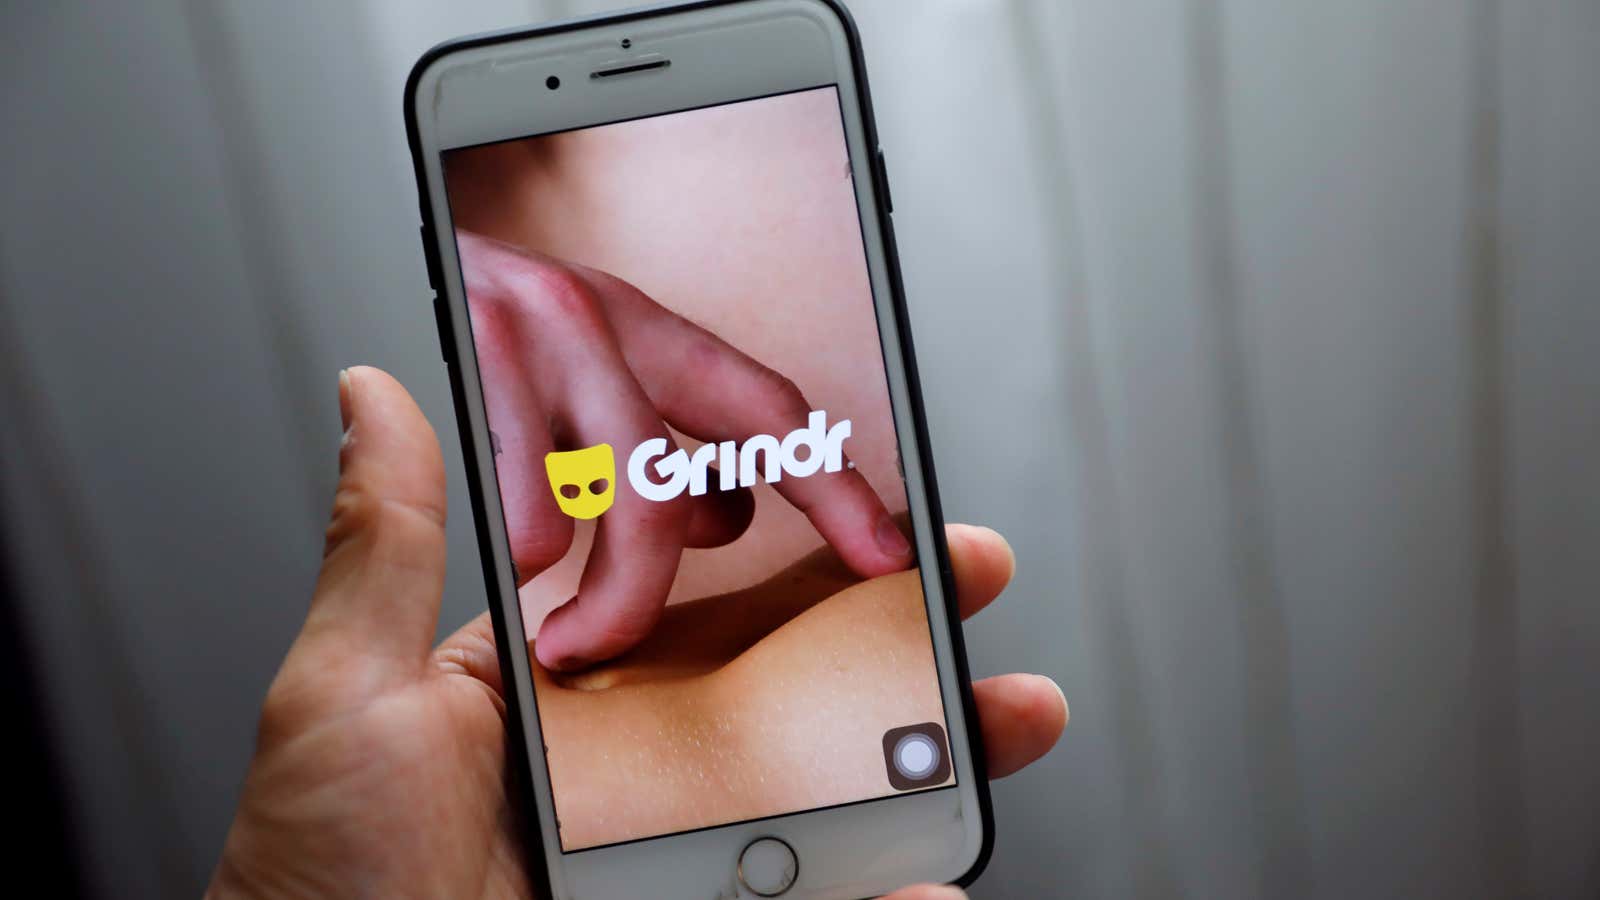 Grindr’s app disappeared from Chinese app stores in recent days.